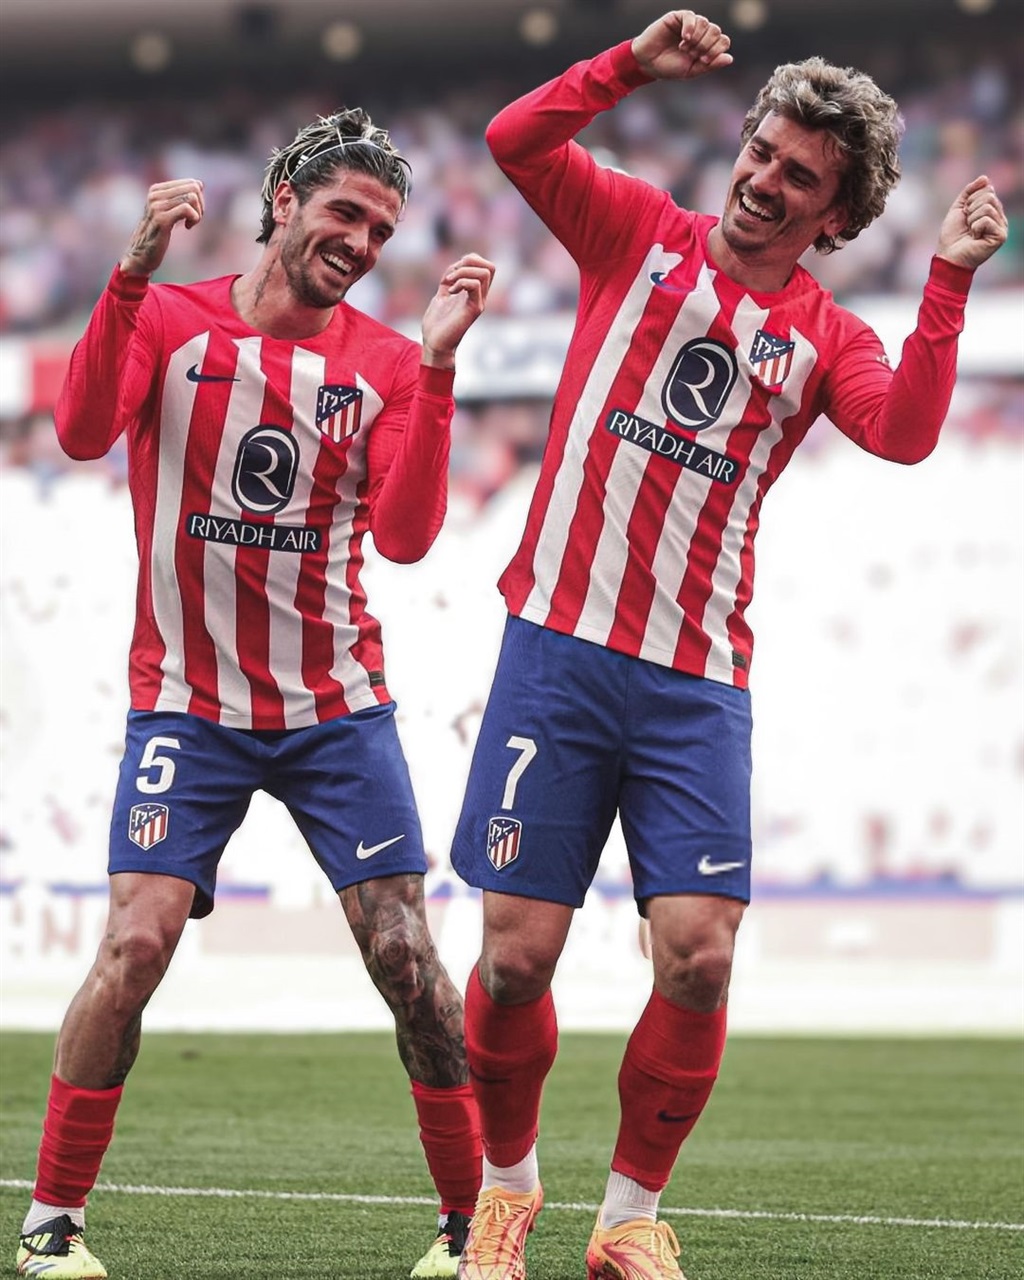 After going viral for paying homage to Siphiwe Tshabalala, Antoine Griezmann revealed why he reenacted Shabba's famous celebration. 

